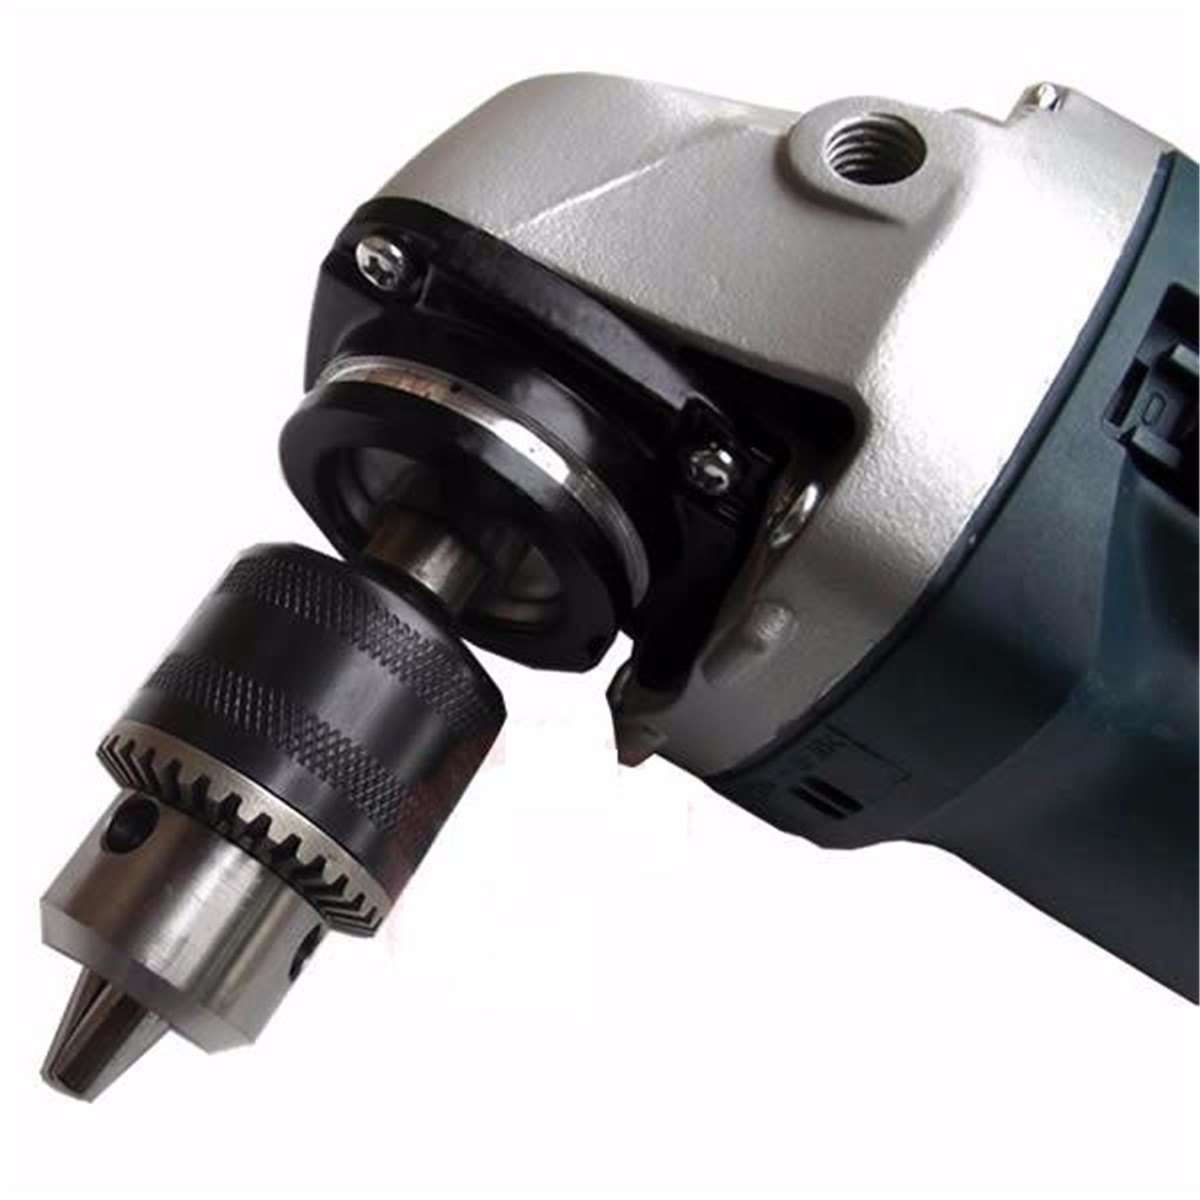 15-10mm-Metal-Stable-Keyed-Drill-Chuck-Convertor-100-Angle-Grinder-Drill-Chuck-M10-Thread-1026441-1